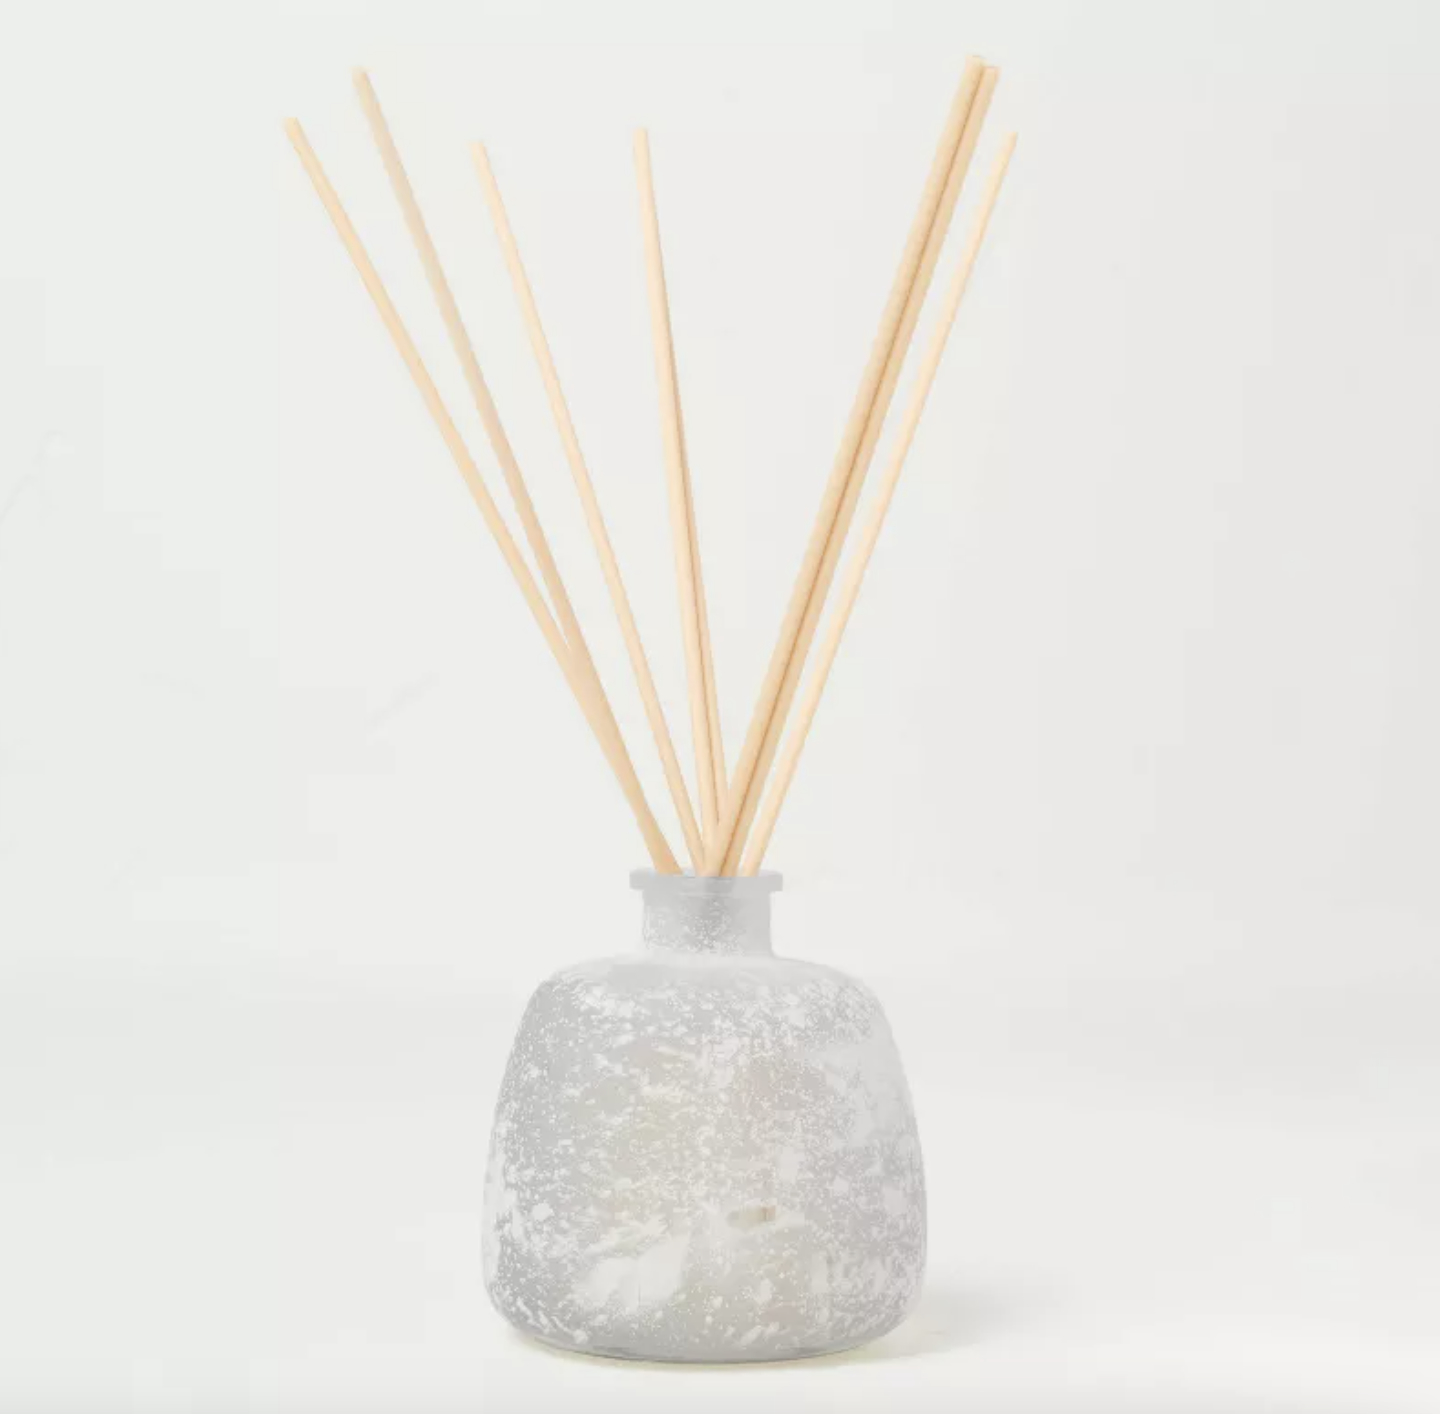 a frosted glass aromatherapy diffuser with wooden diffuser sticks